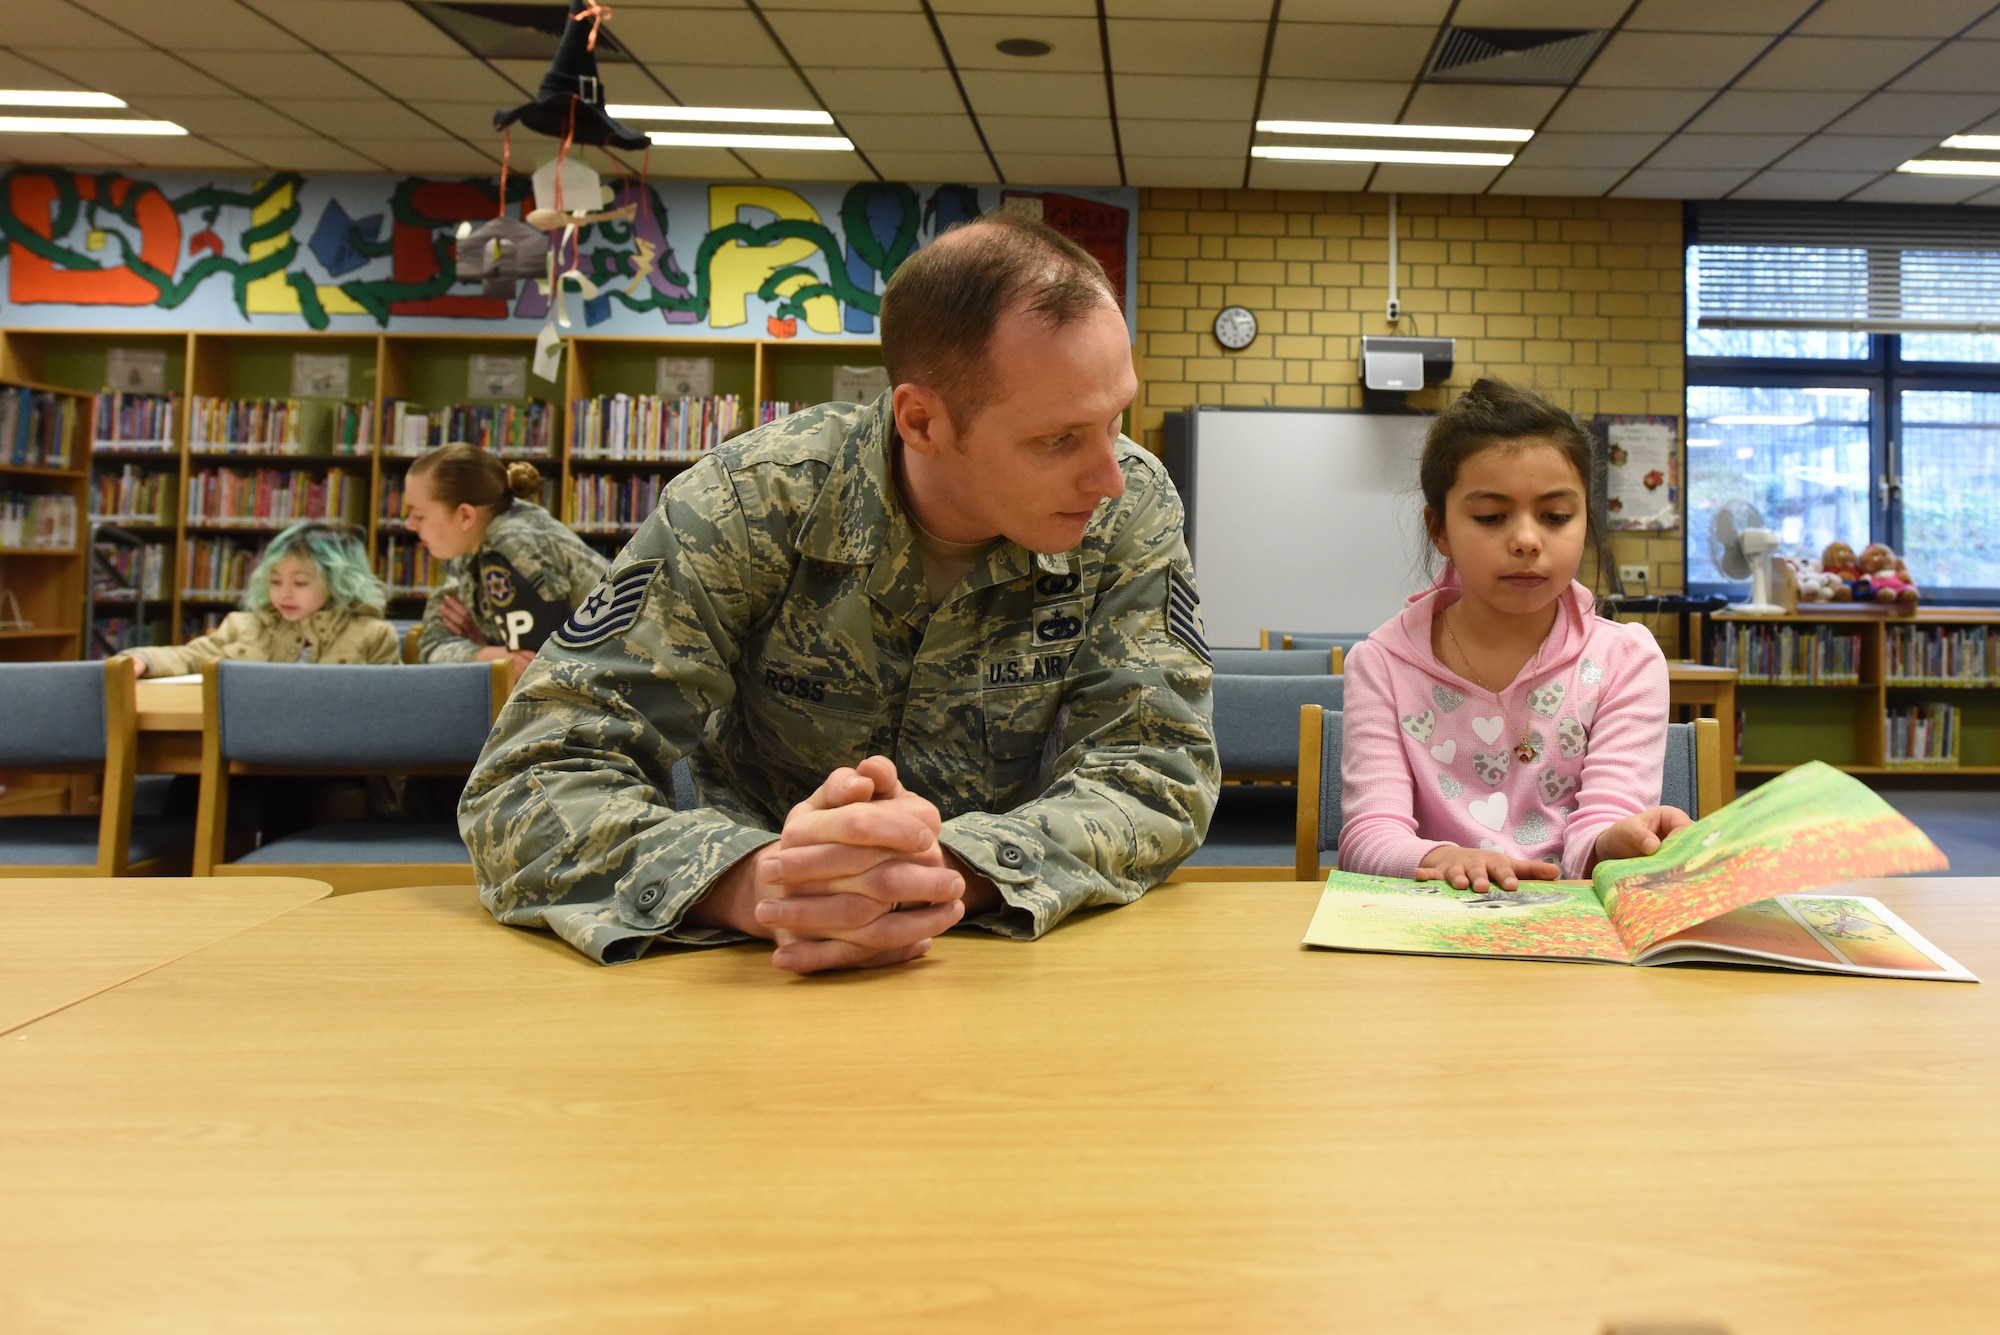 Tech. Sgt. Jere Ross, 86th Airlift Wing noncommissioned officer of resources and requirements, and Airman 1st Class Sarah Marcinko, 569th United States Forces Police Squadron security forces personnel, read with children on Feb. 6, 2018 at Vogelweh Elementary School on Vogelweh Military Complex, Germany. Children select a book based on their reading ability and then read to their military volunteer for up to 30 minutes at a time.